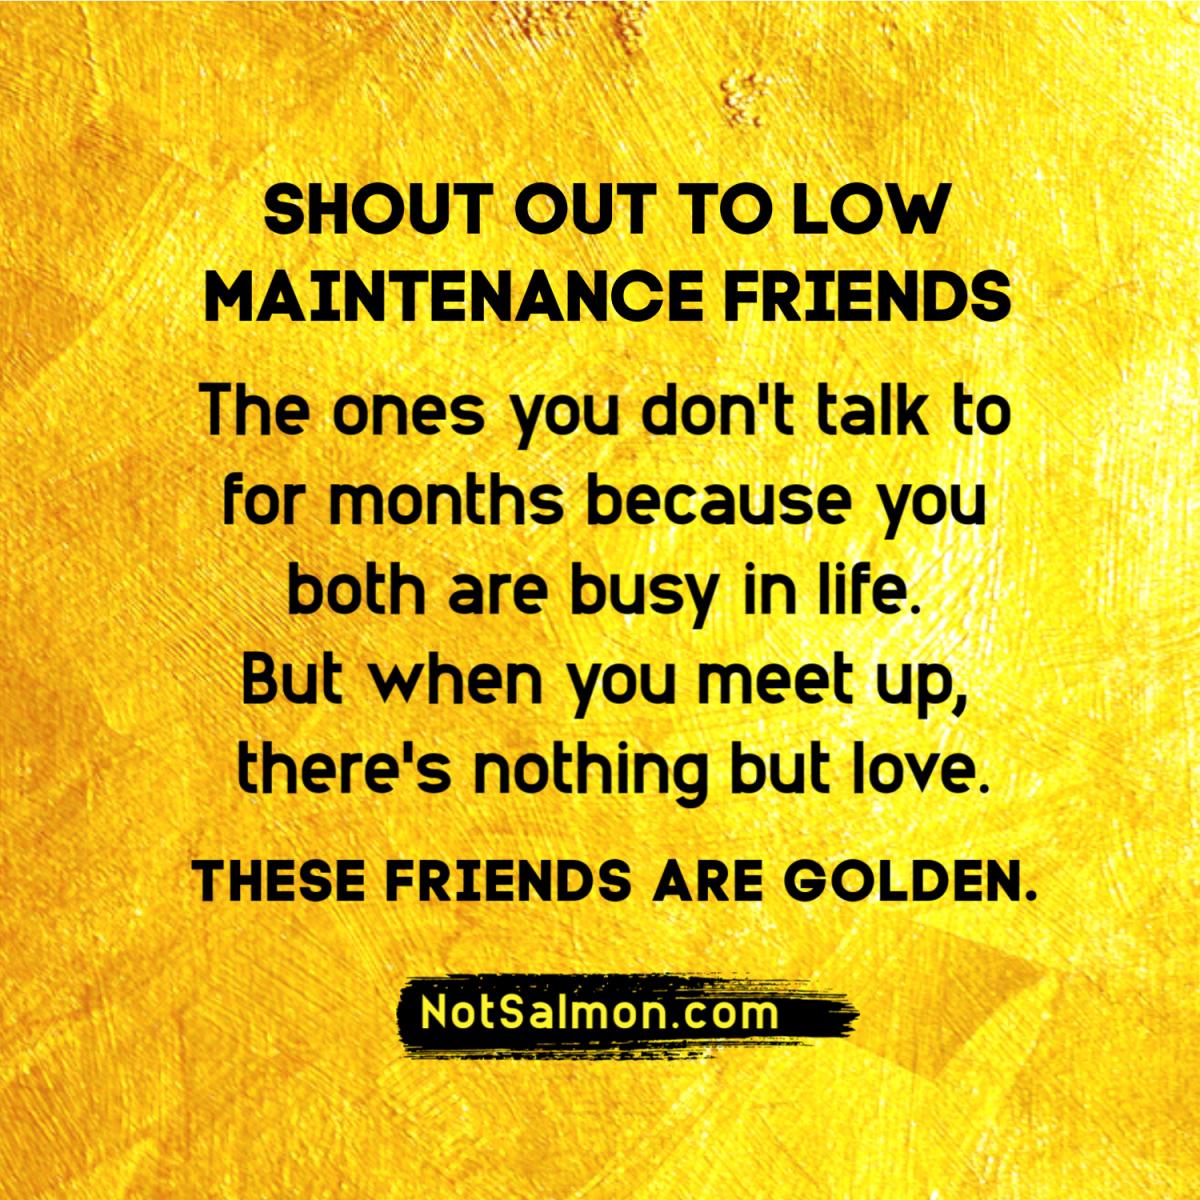 Low Maintenance Friends Quote About Good Friendships